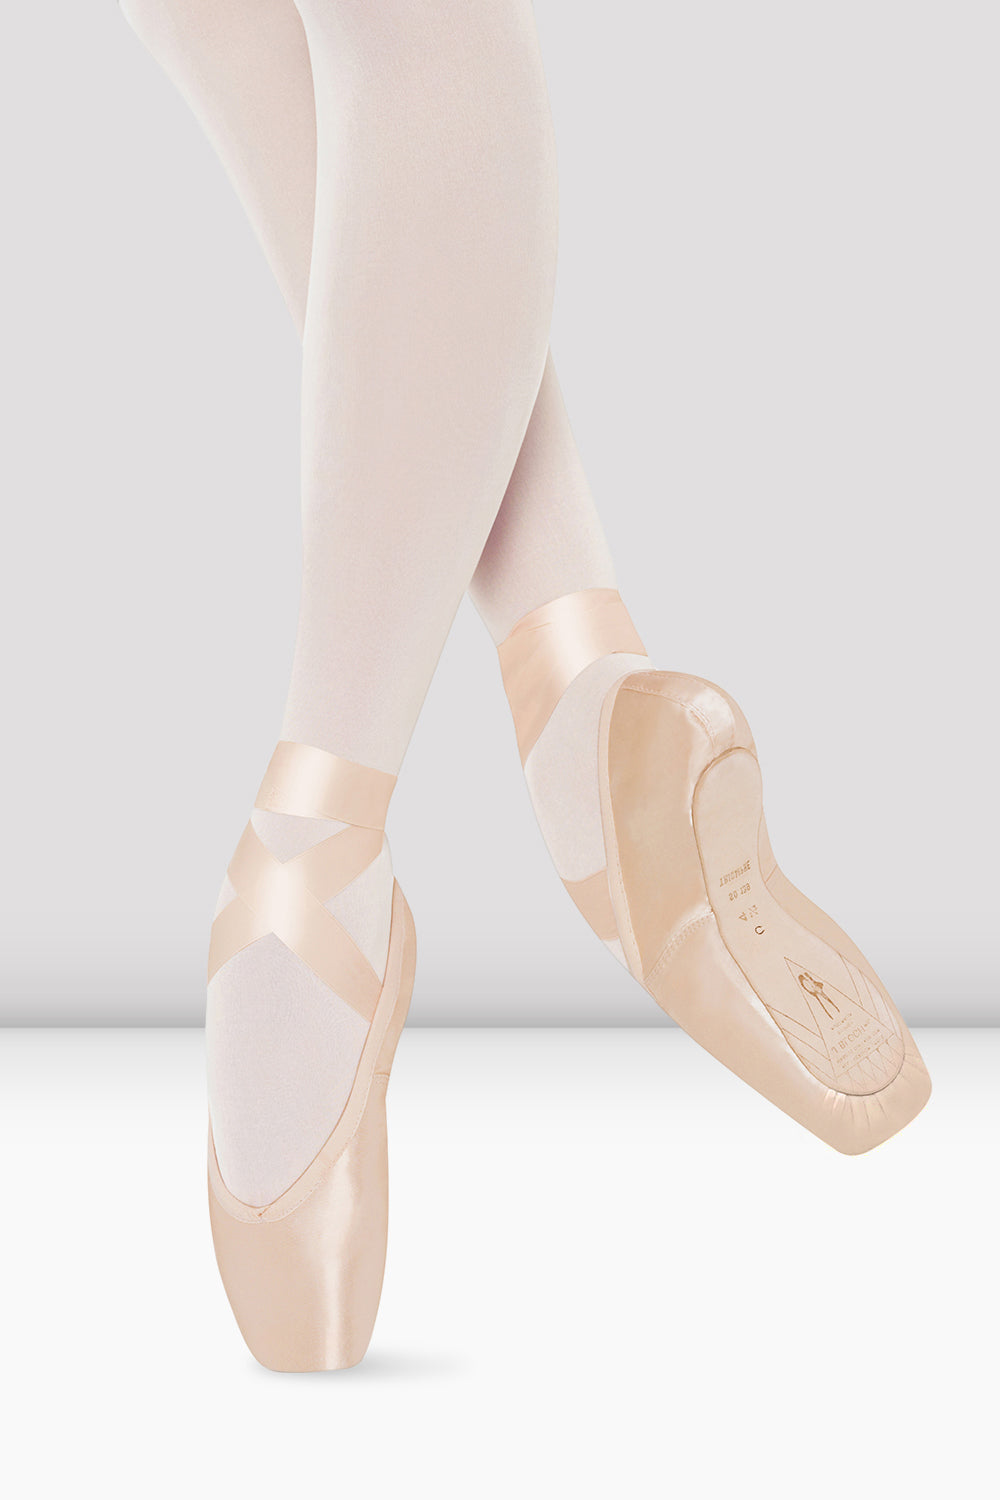 BLOCH Triomphe Pointe Shoes, Pink Satin